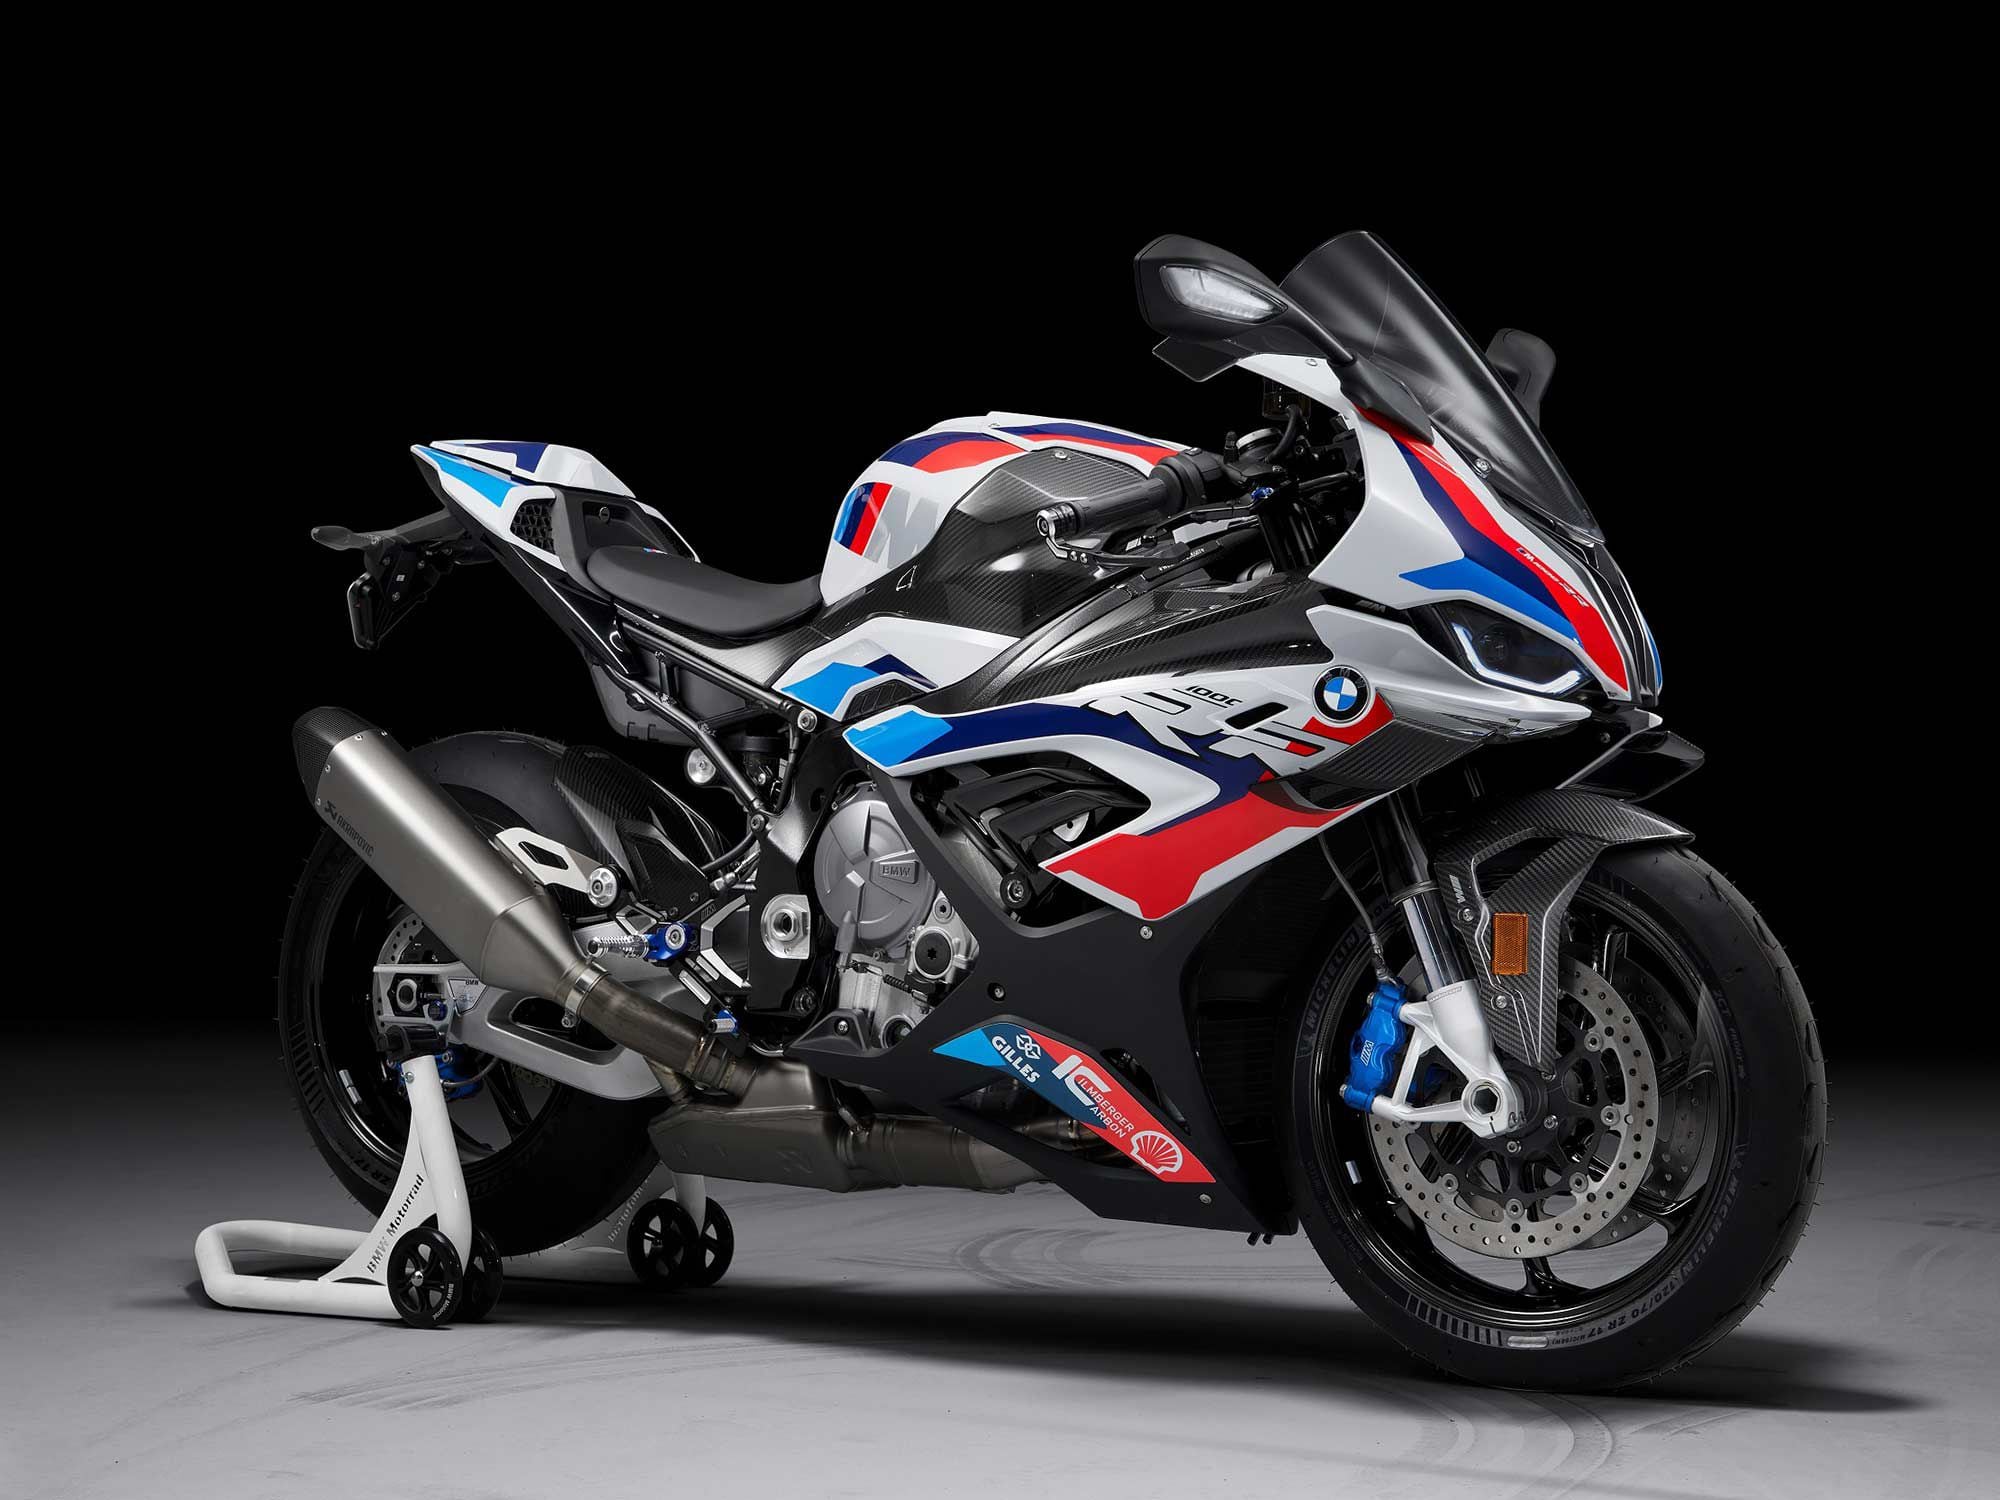 The new S 1000 RR will adopt many of the M 1000 RR’s features including aerodynamic winglets.